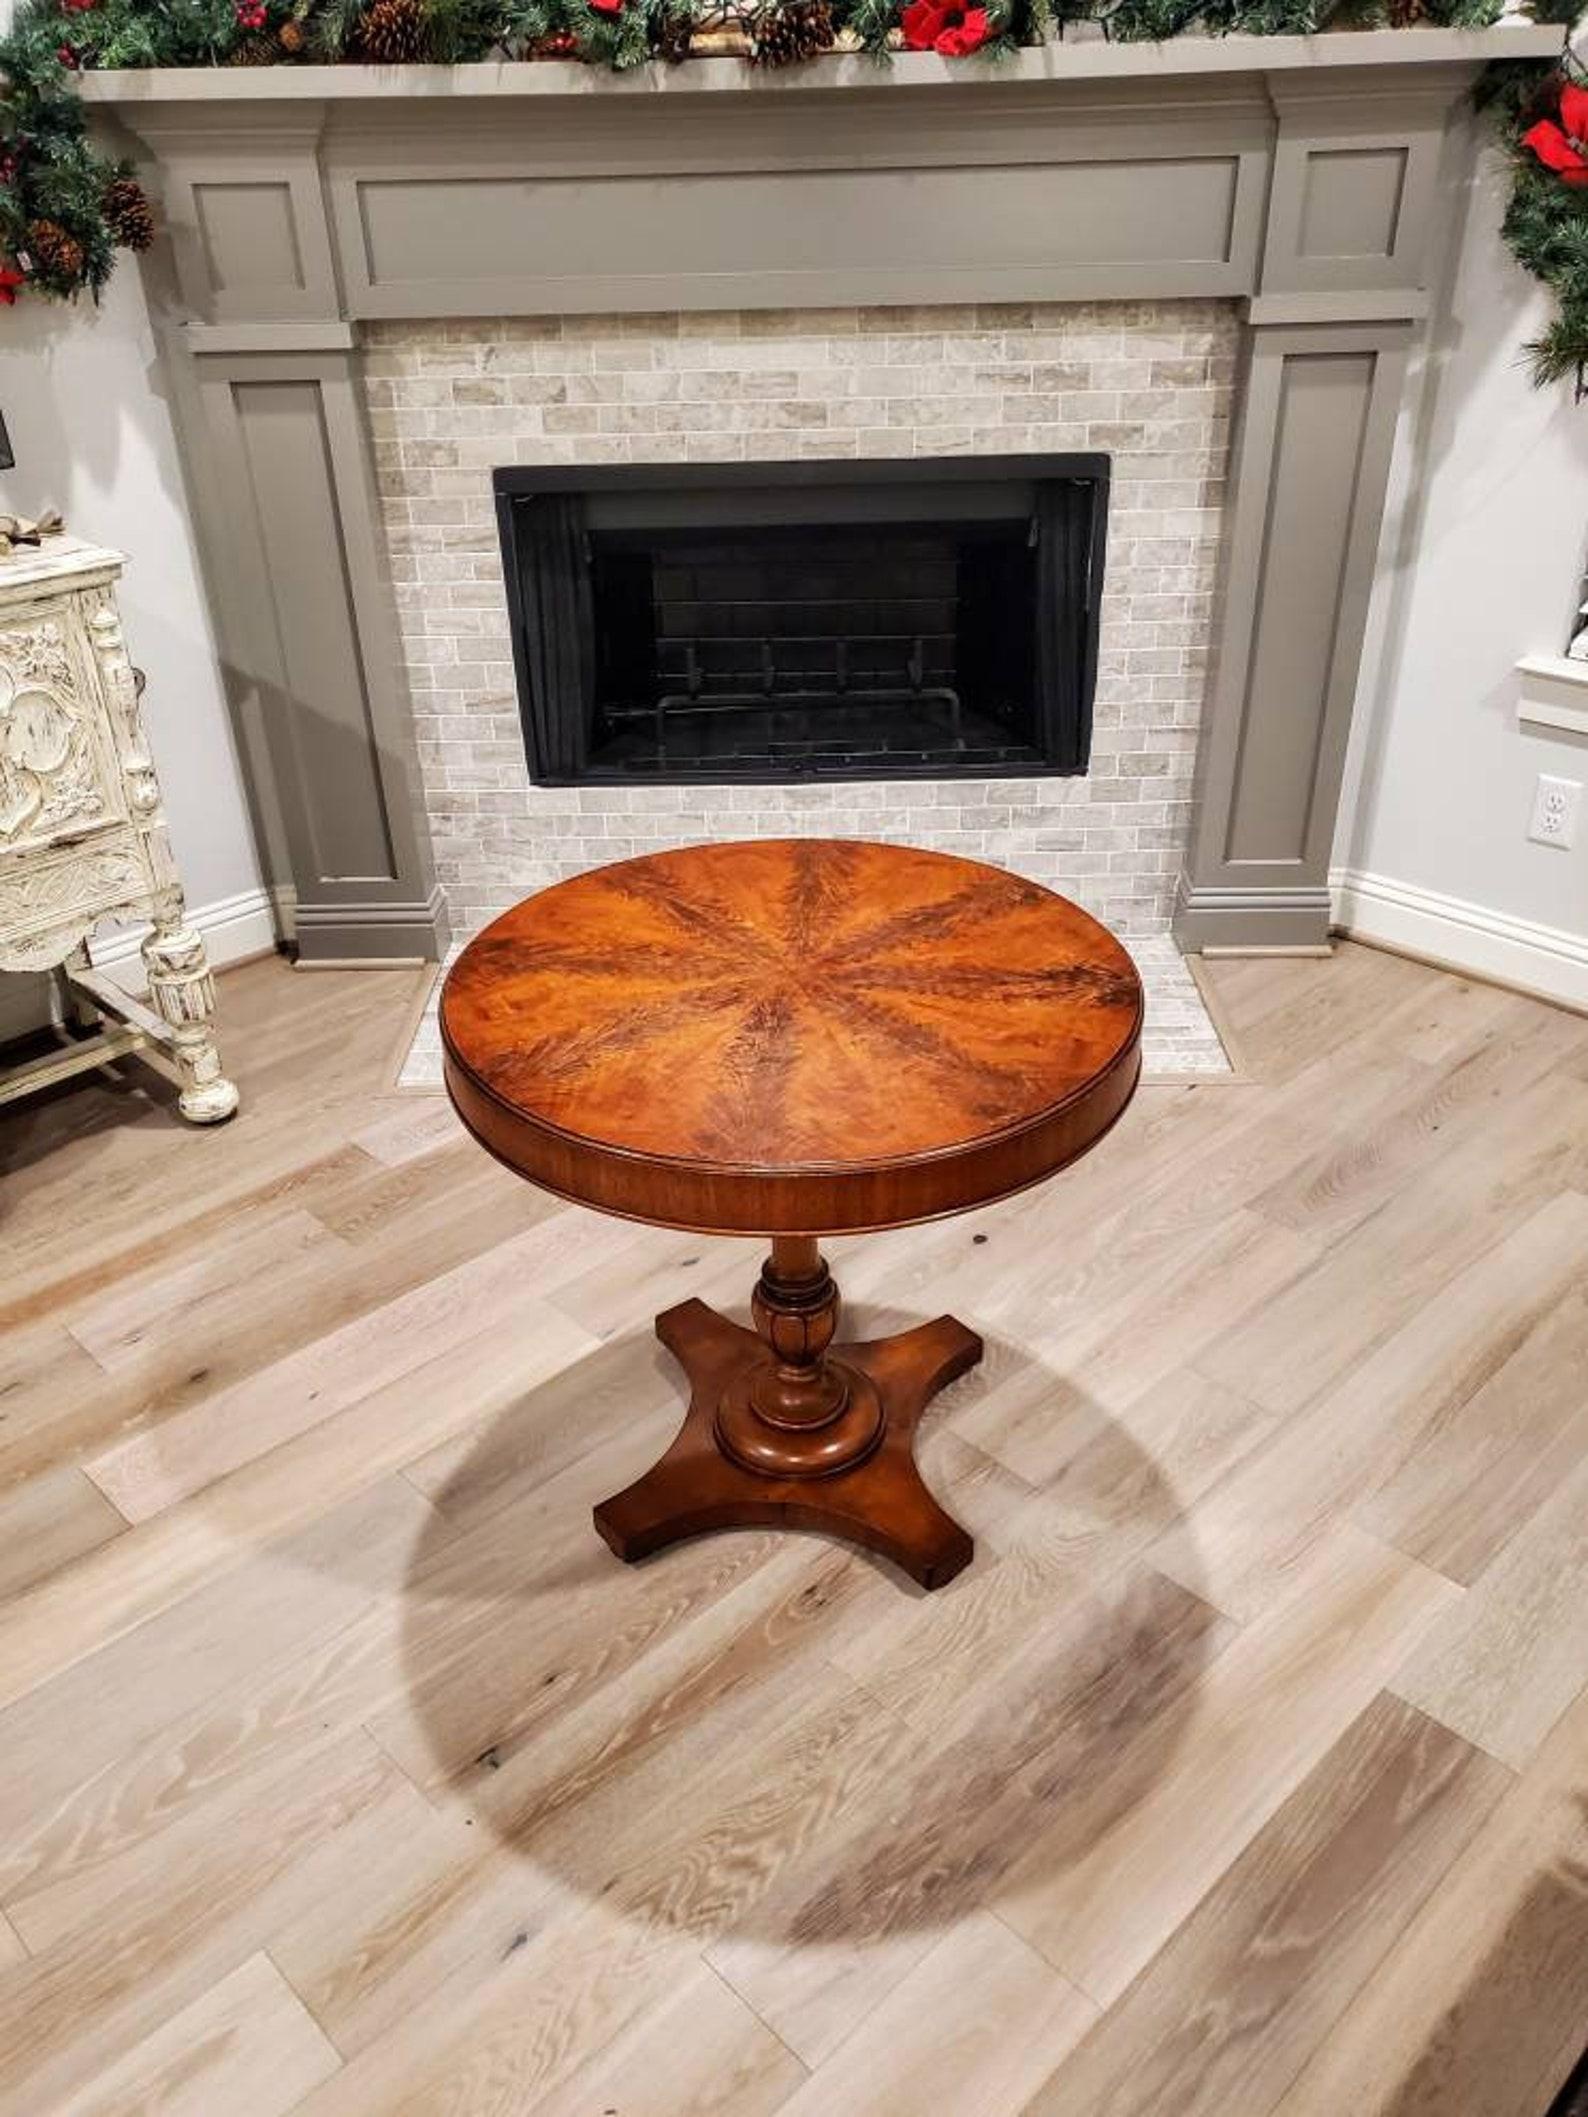 A stunning Schmieg & Kotzian signed mahogany inlaid table from the first half of the 20th century. Exceptionally hand-crafted, fine quality craftsmanship, detailing and solid wooden construction. 

The exquisite American table, circa 1930,